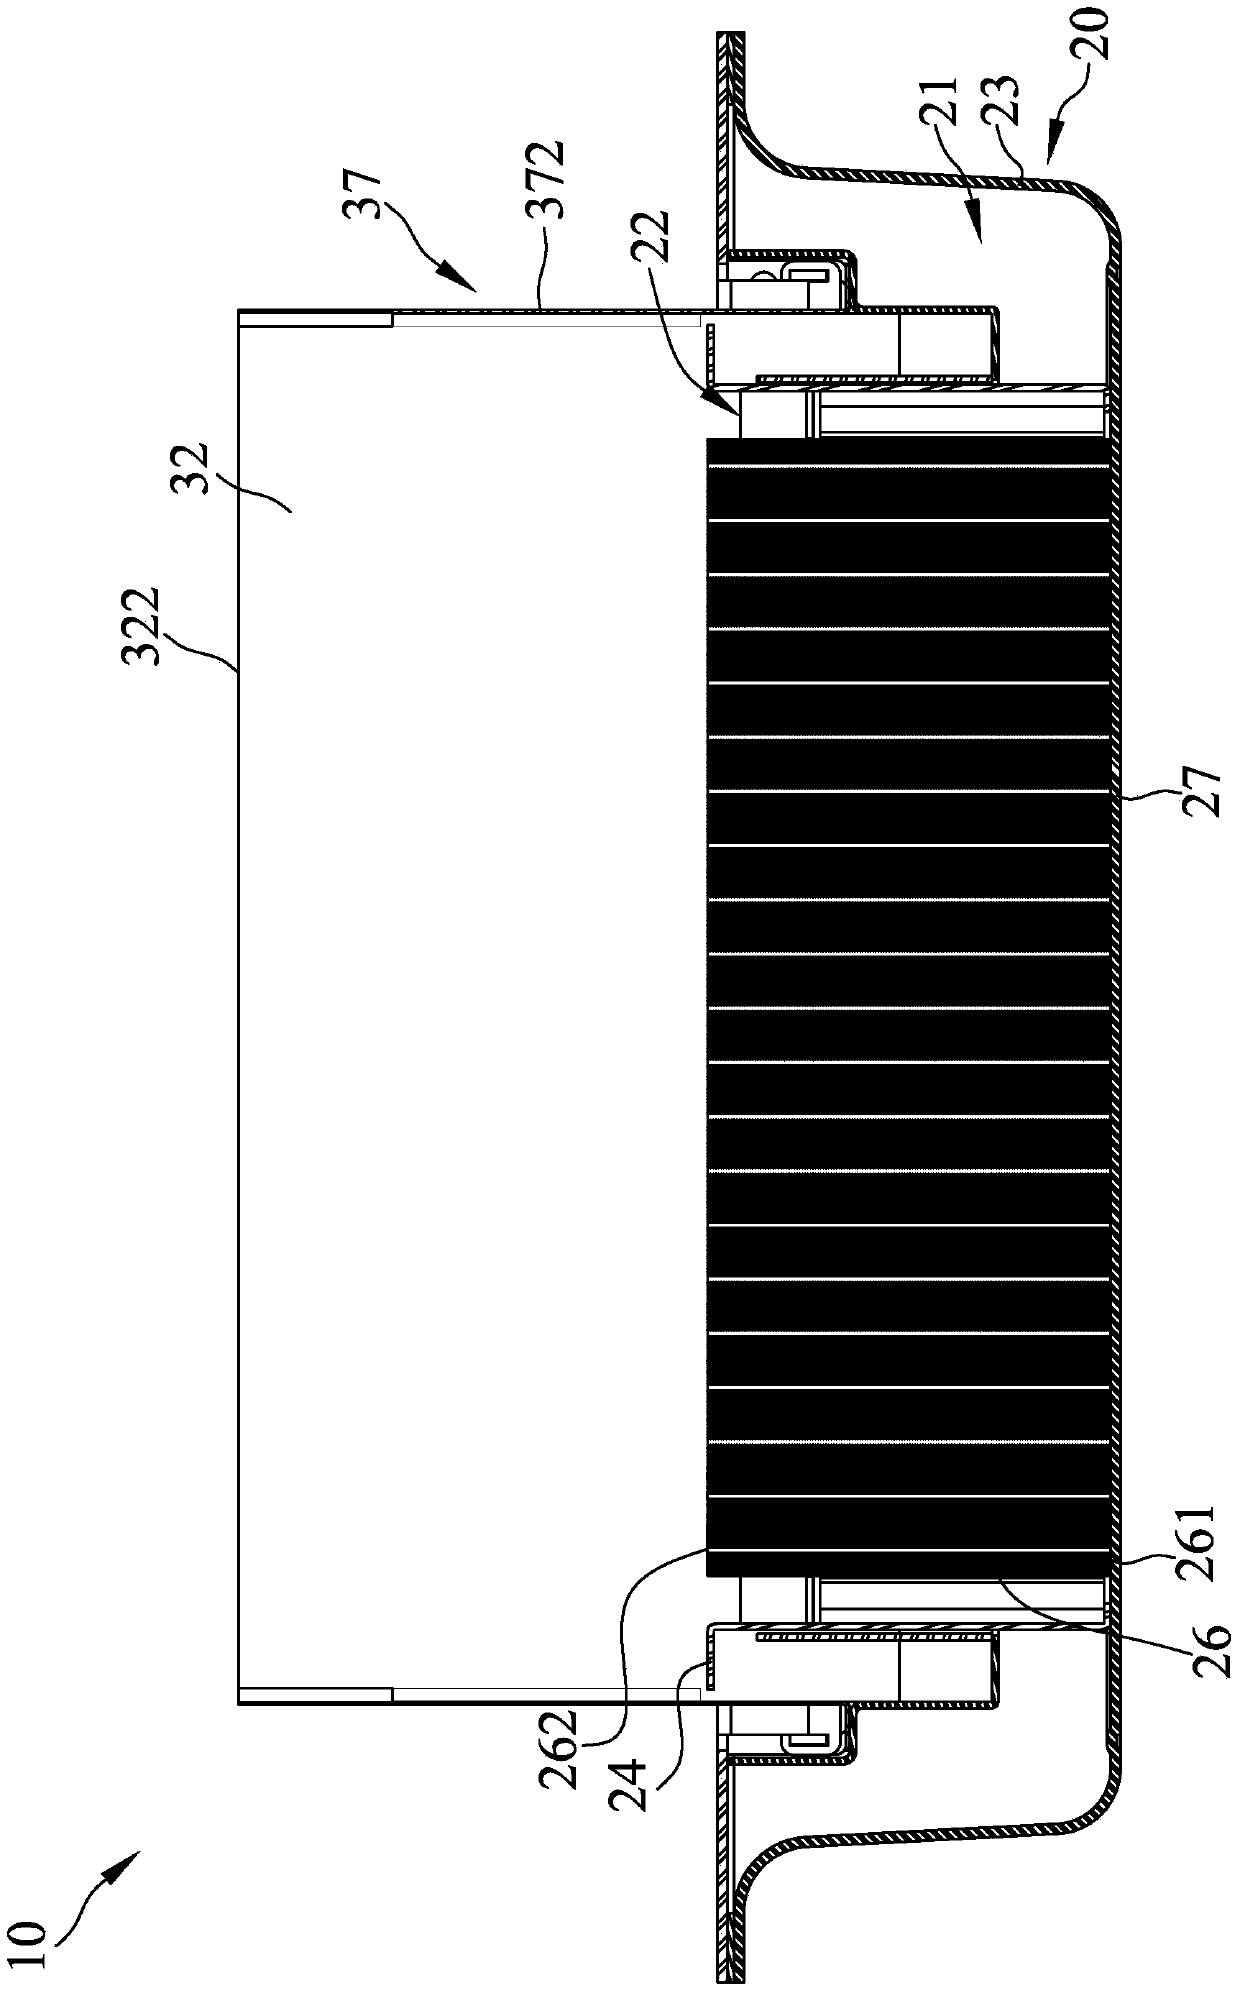 Combustion device with safety